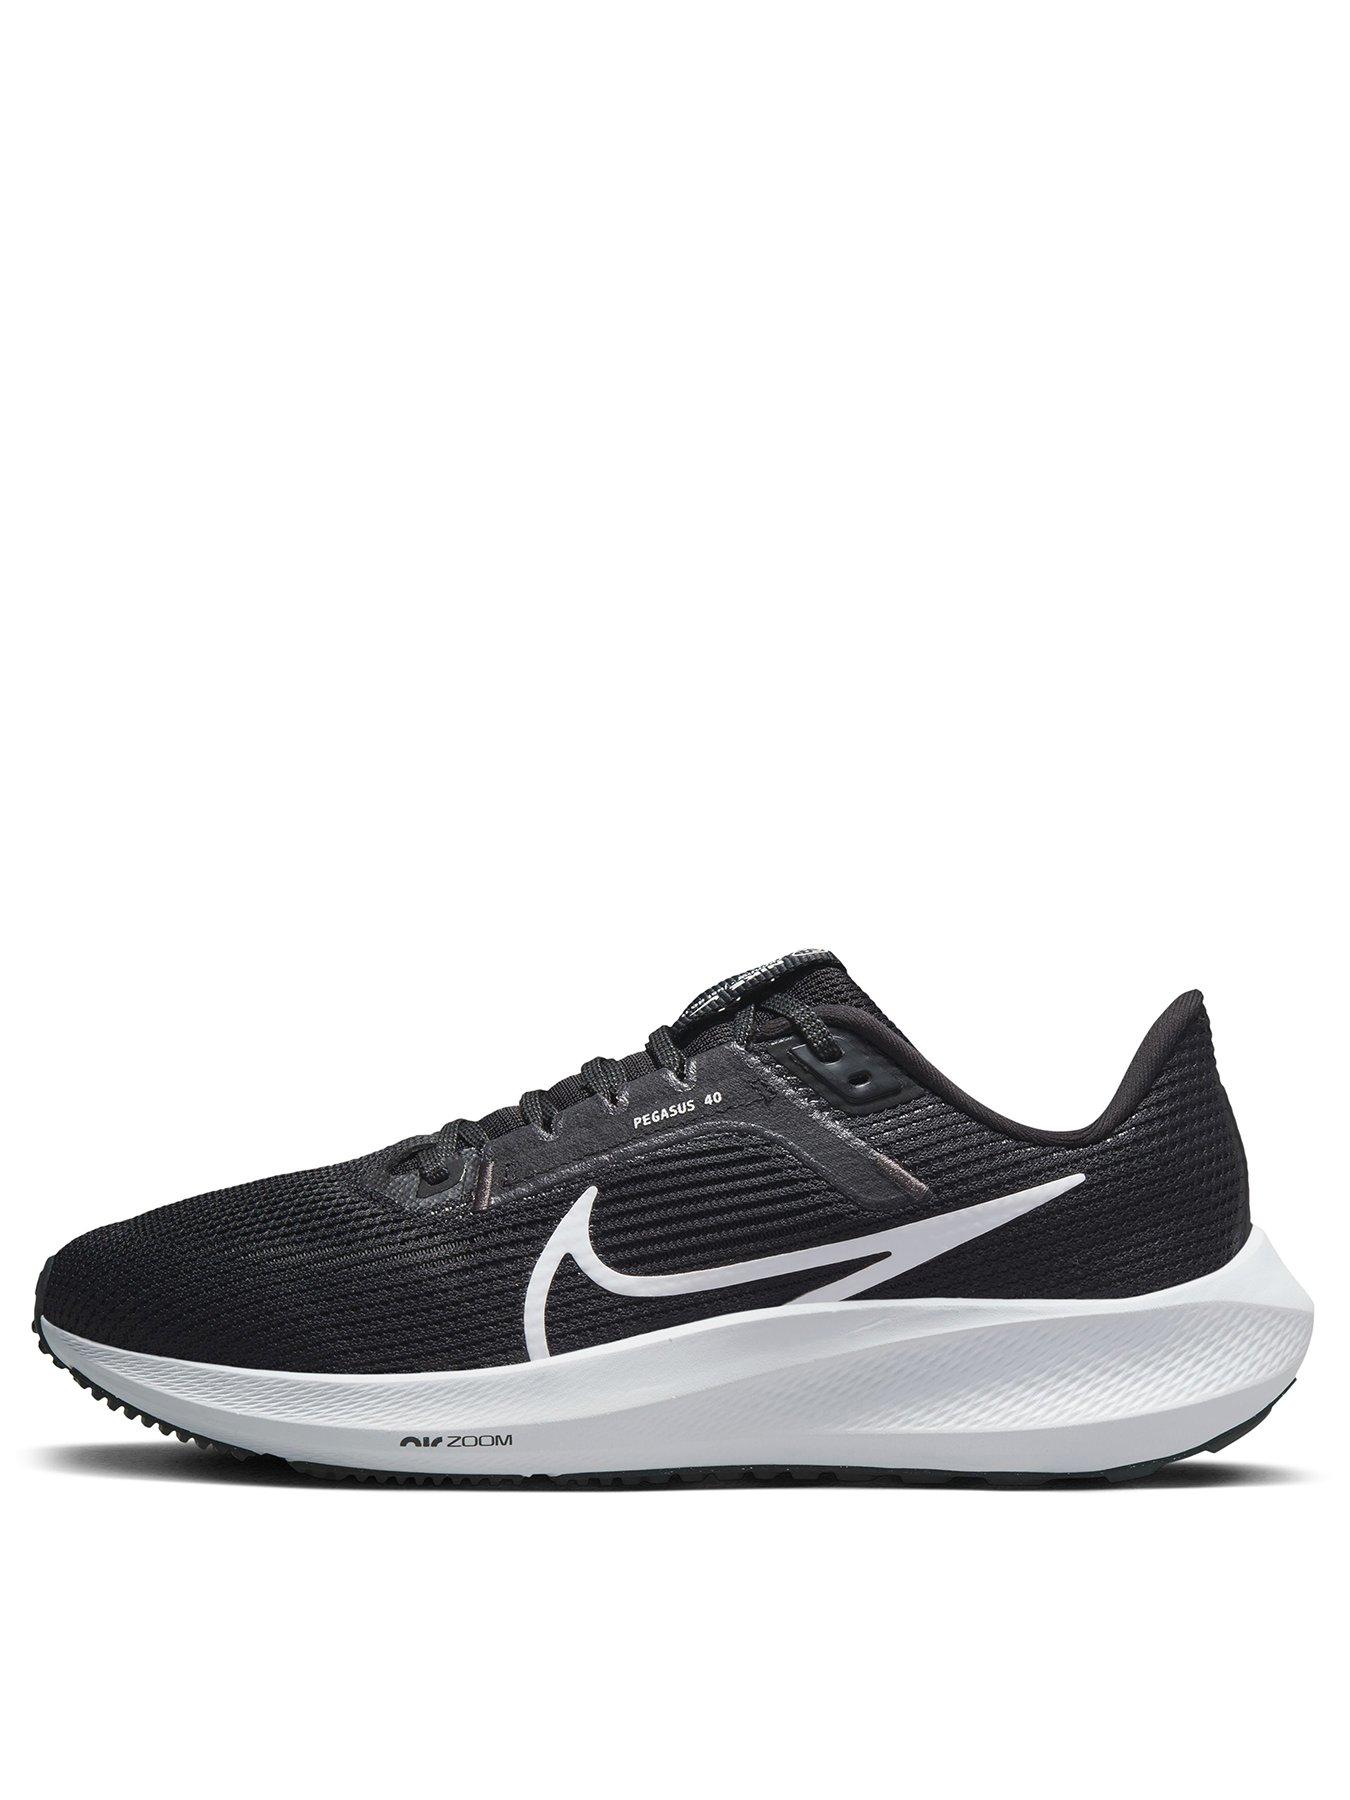 Nike Air | Womens sports shoes | Sports & leisure | Very